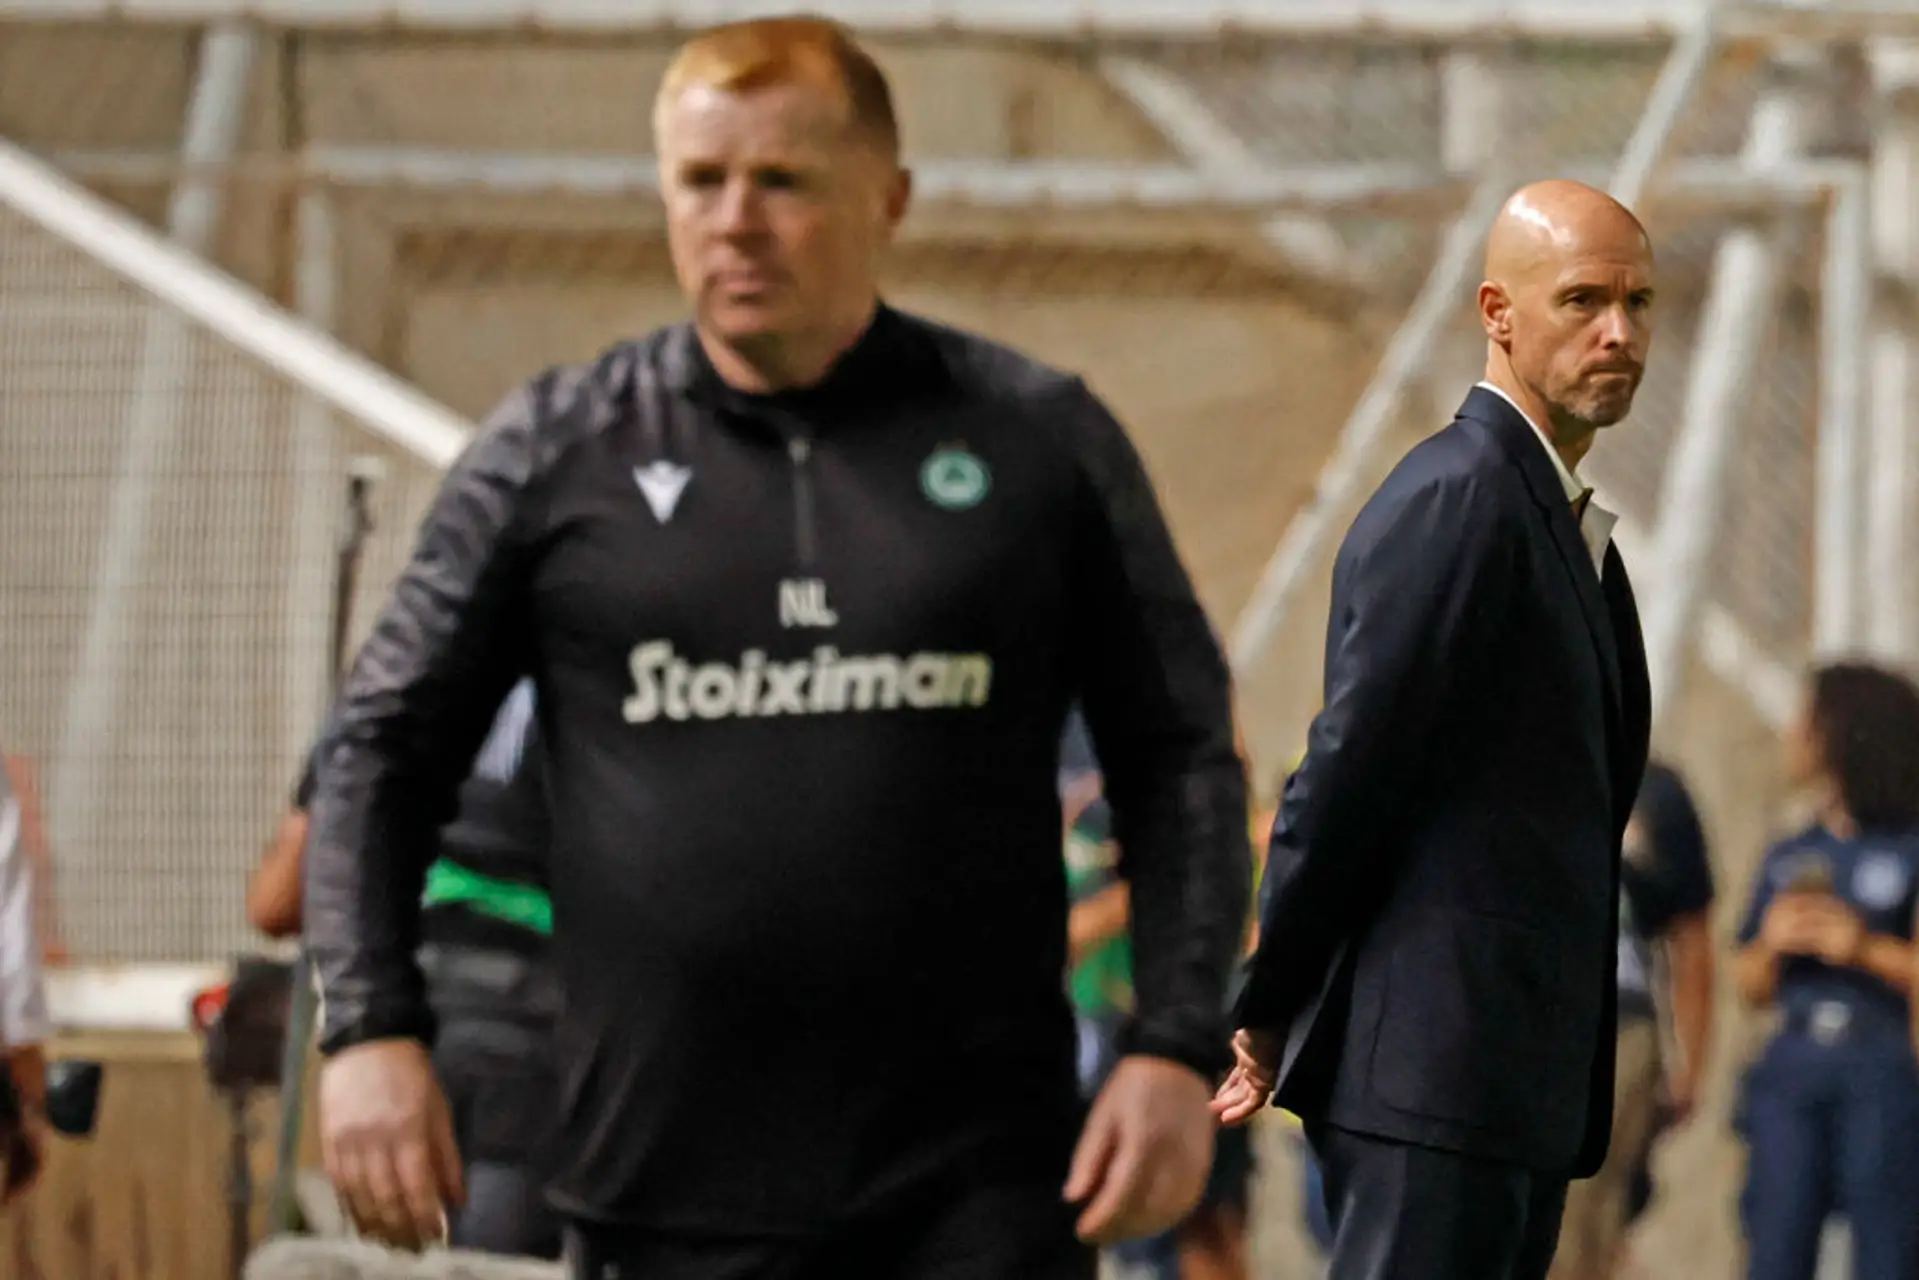 Omonia sack manager after Man United defeats & 2 more under-radar stories today